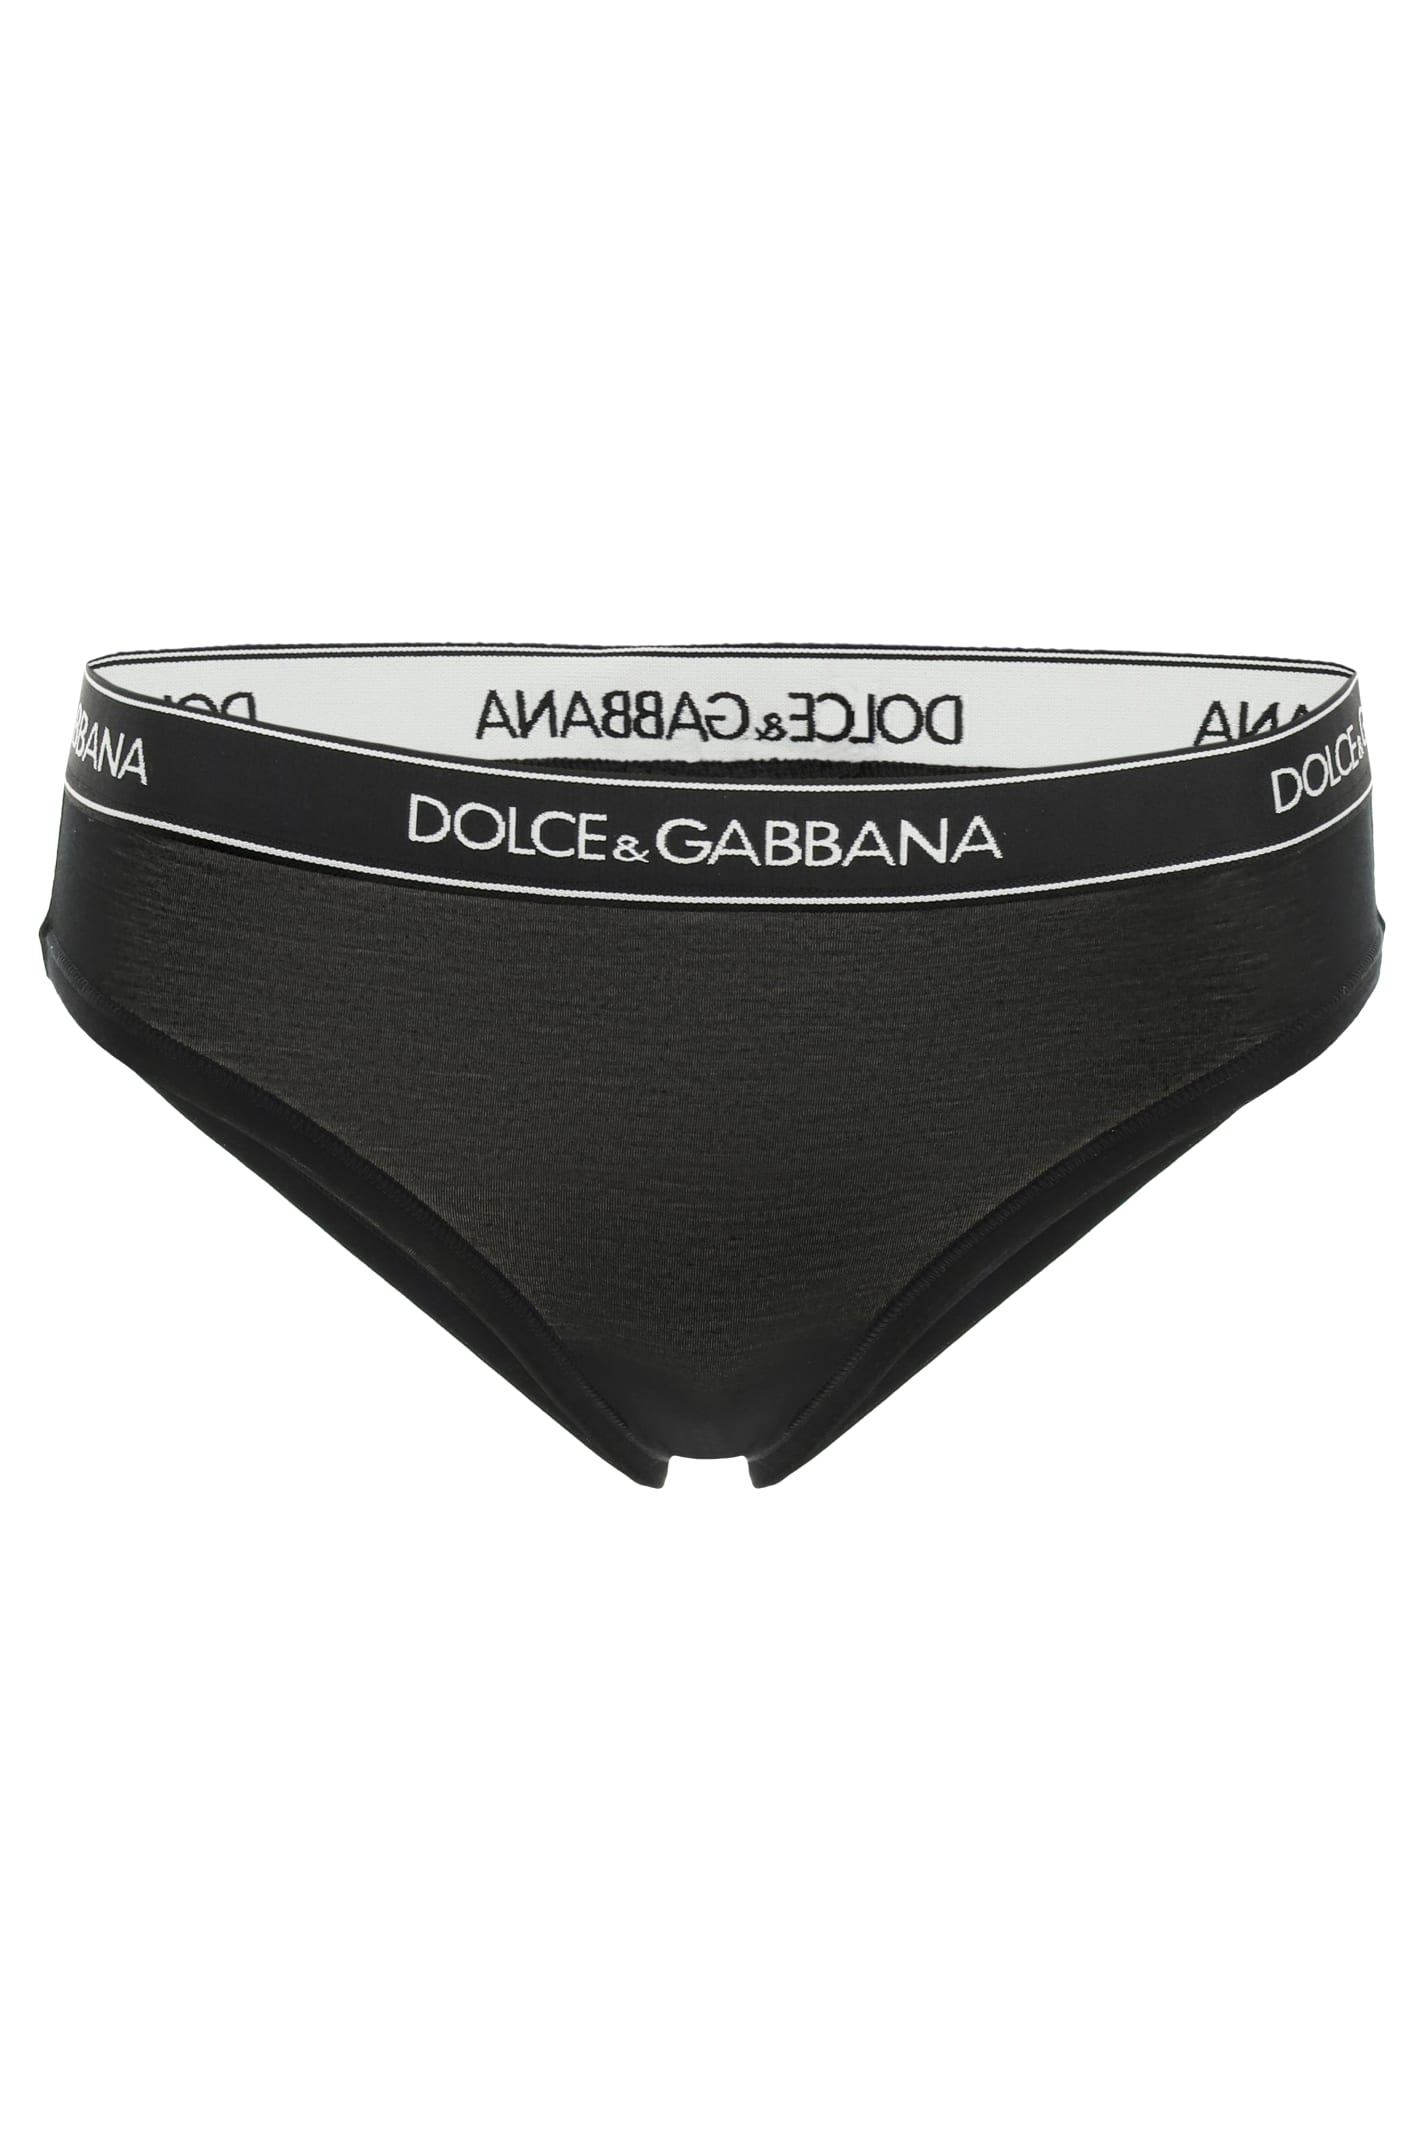 DOLCE & GABBANA JERSEY BRIEFS WITH LOGO BAND,O2B20T FUGJT N0000